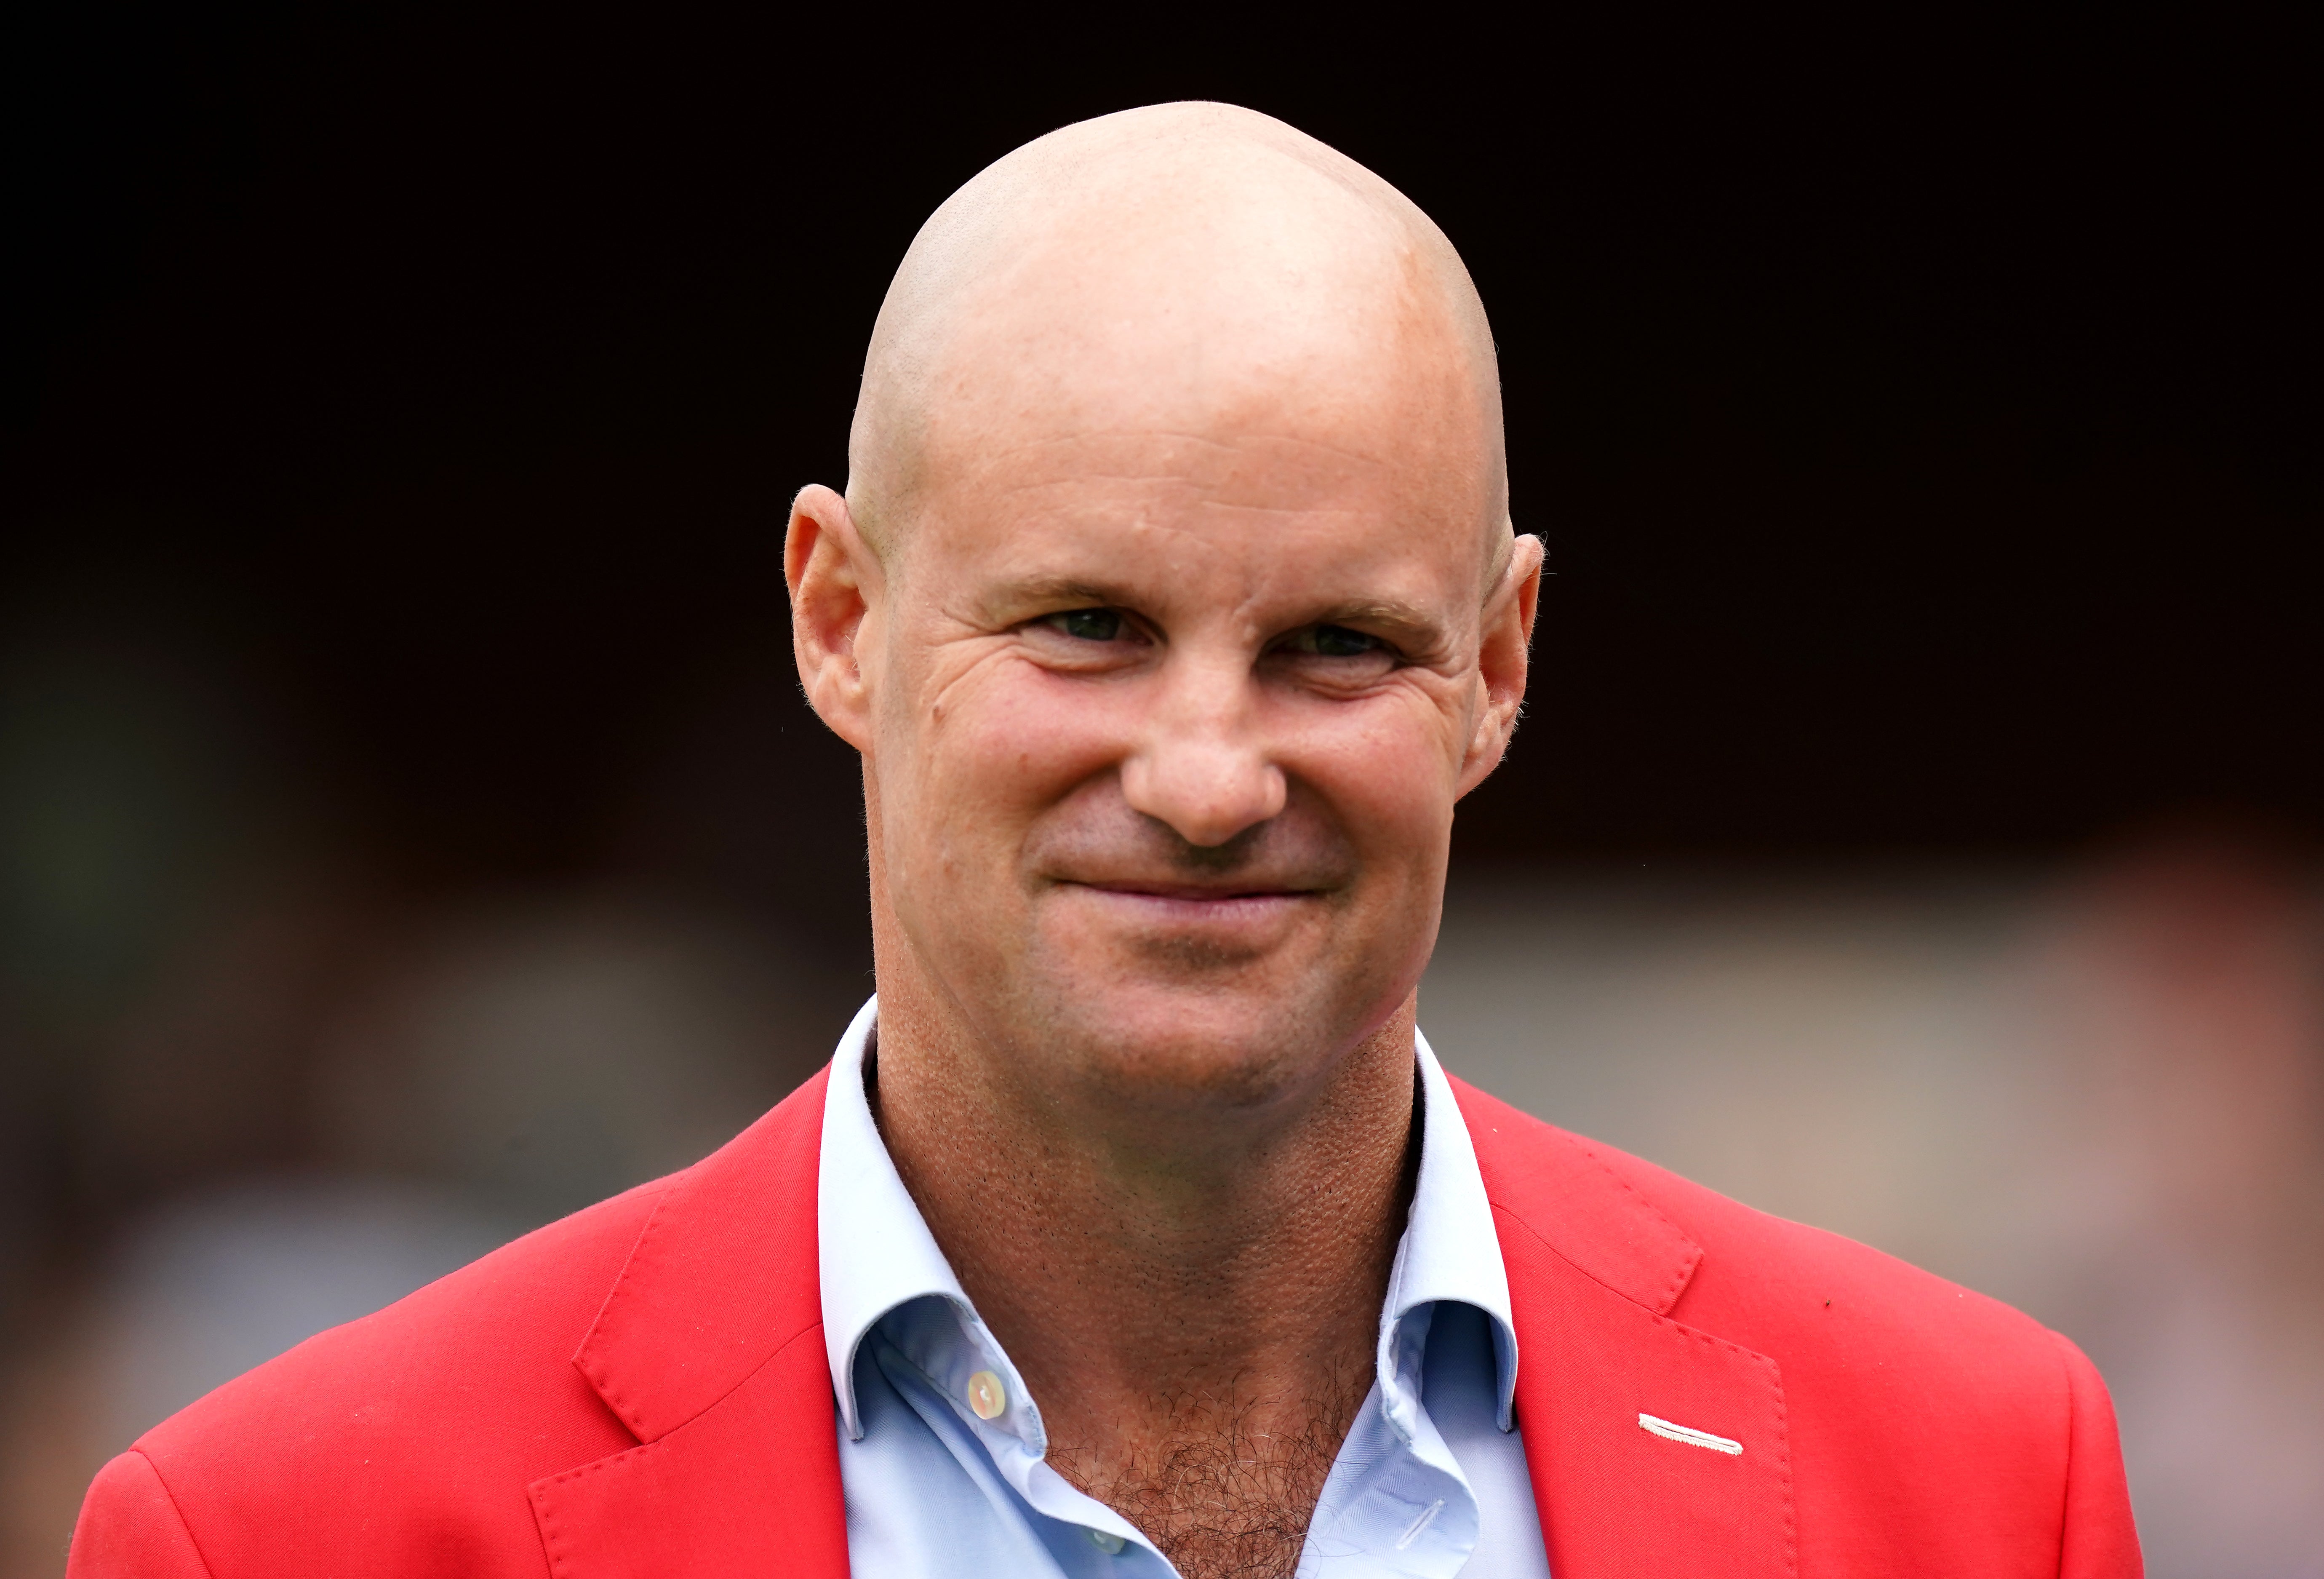 Sir Andrew Strauss is serving as the England and Wales Cricket Board’s managing director on an interim basis (Zac Goodwin/PA).